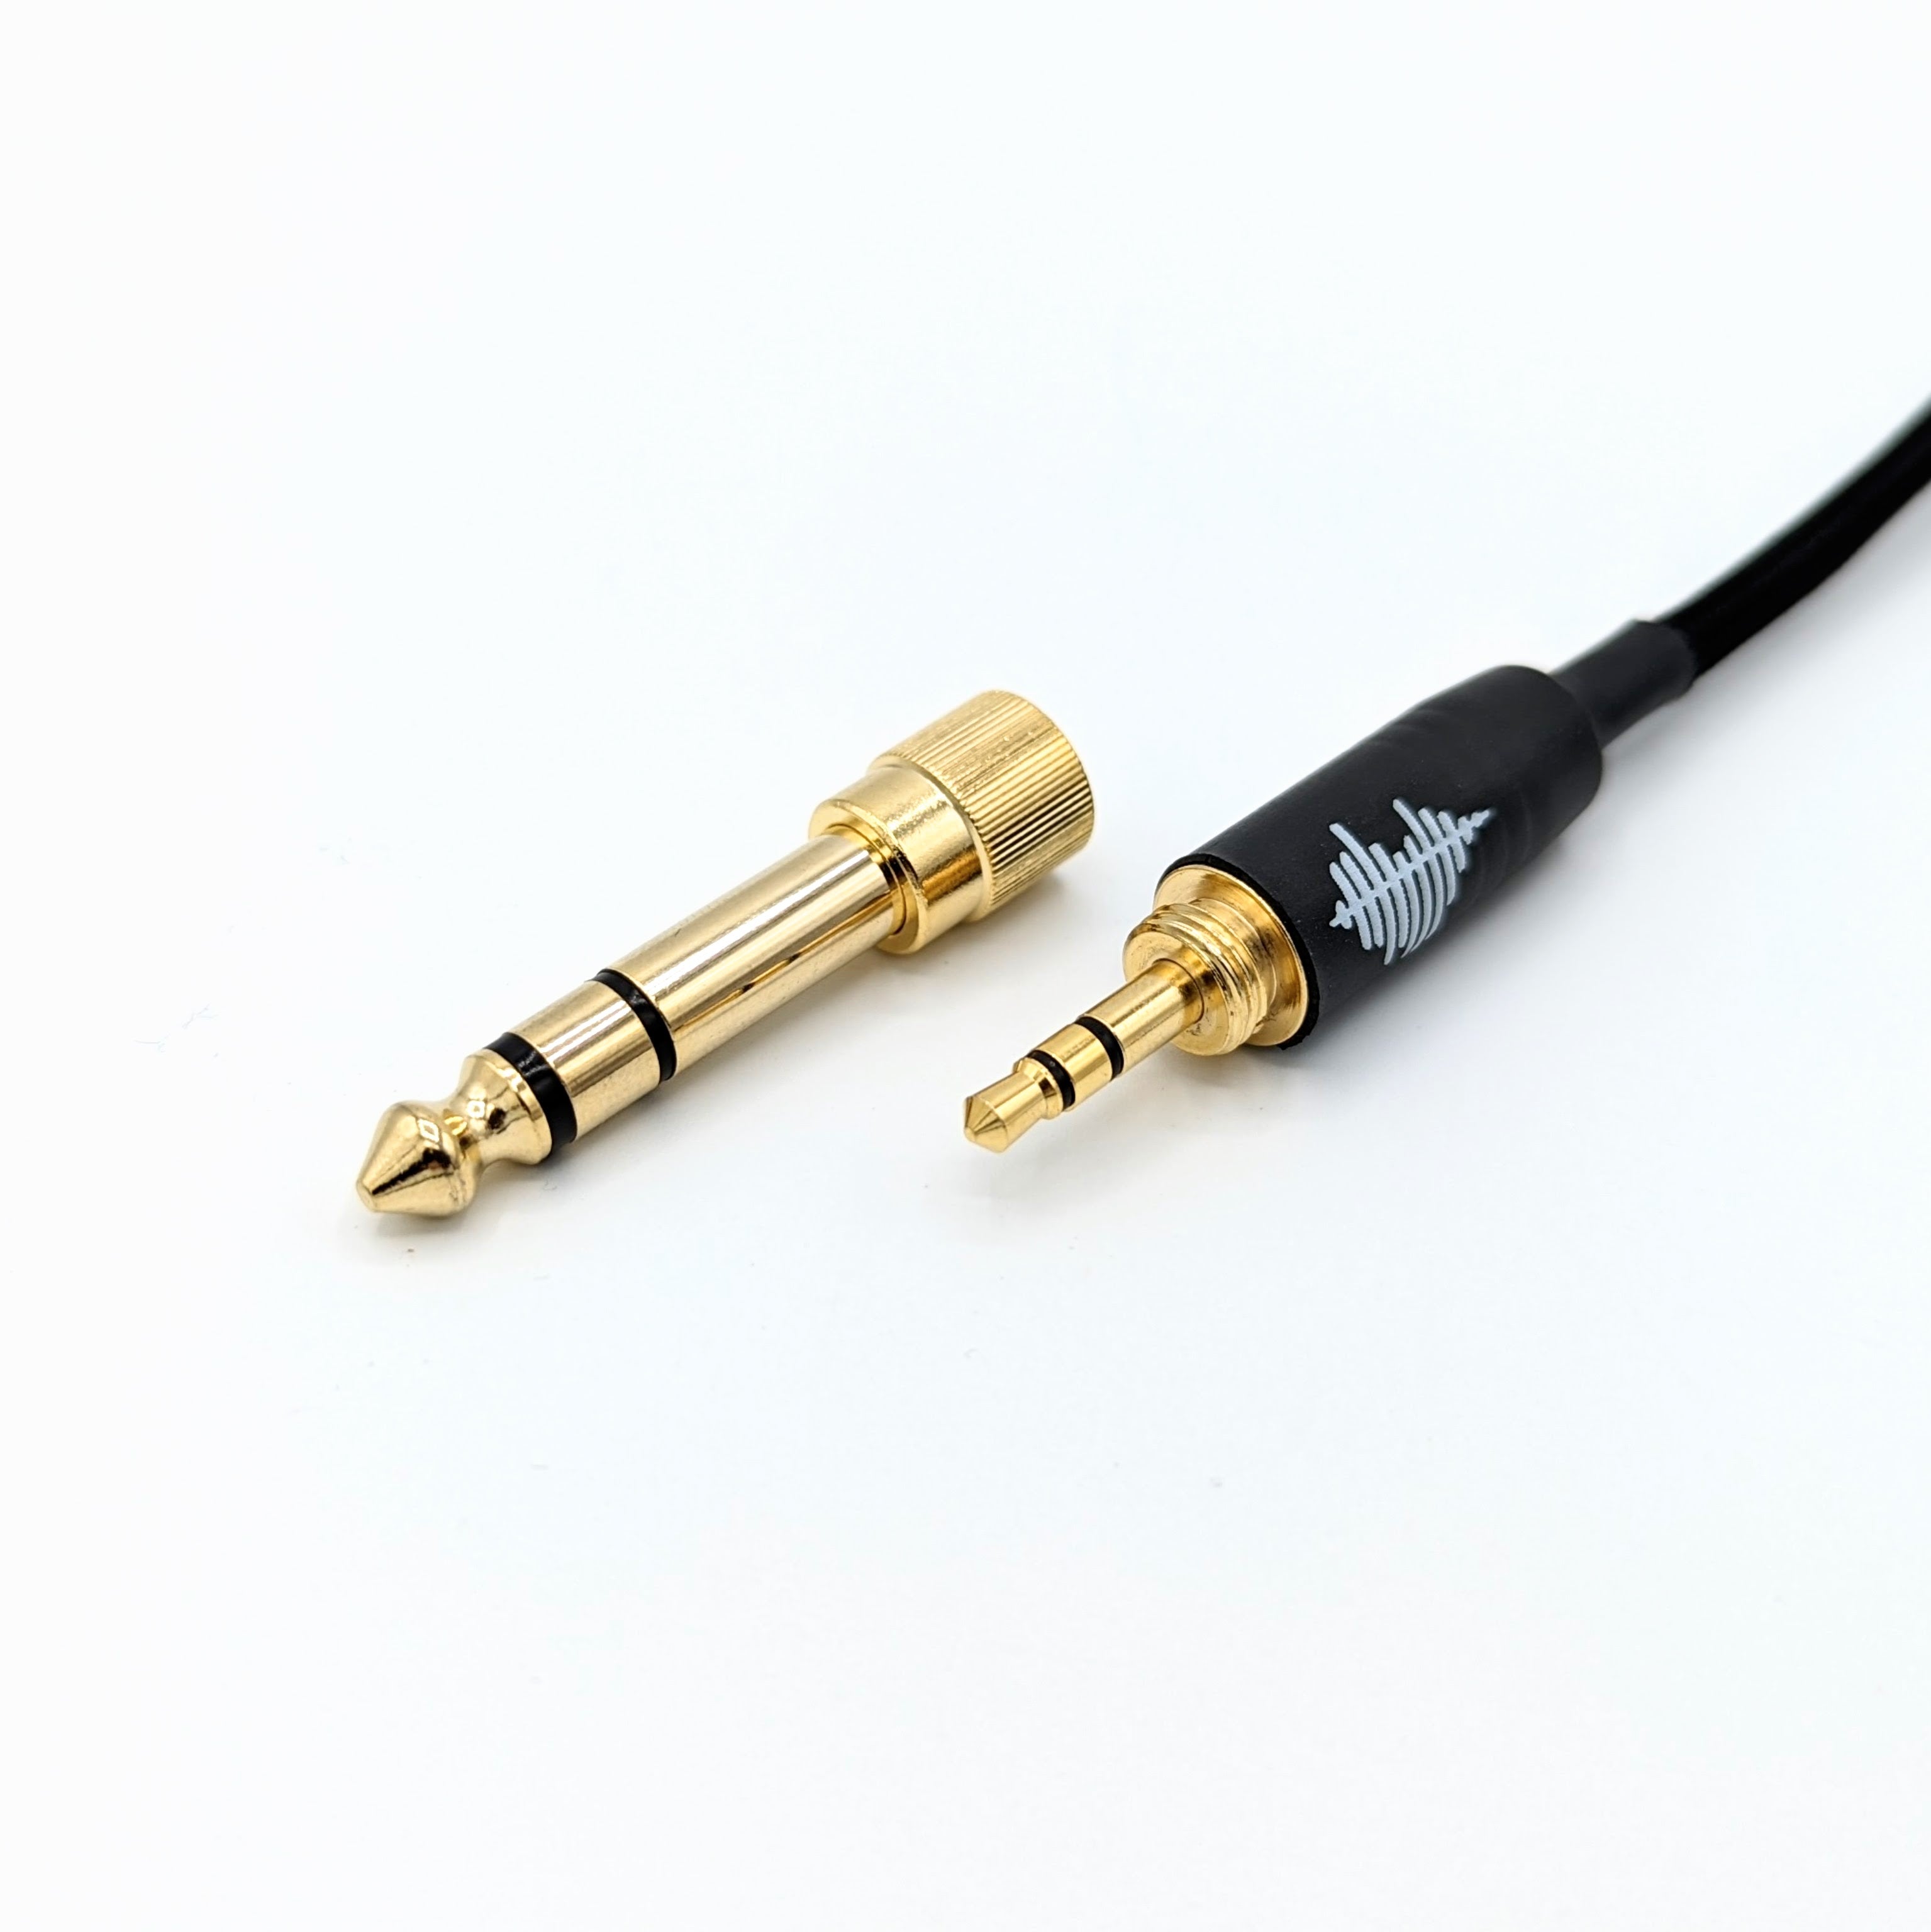 RPL-HC-8: Female 4-pin mini-XLR headphone cable for HD 490 and Drop DT177X GO Heapdhones